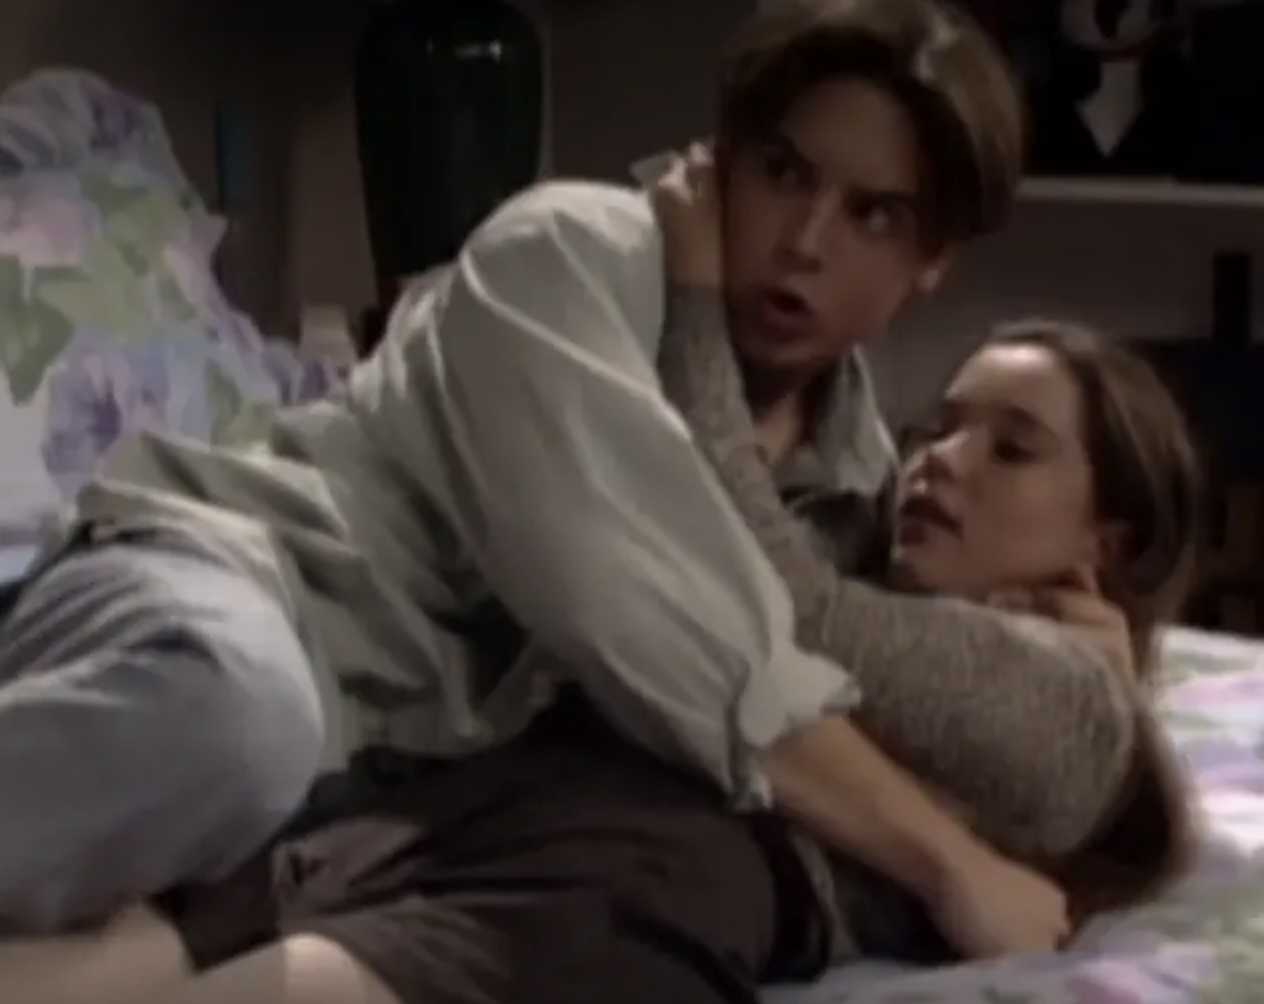 A scene with Will and a girl in bed